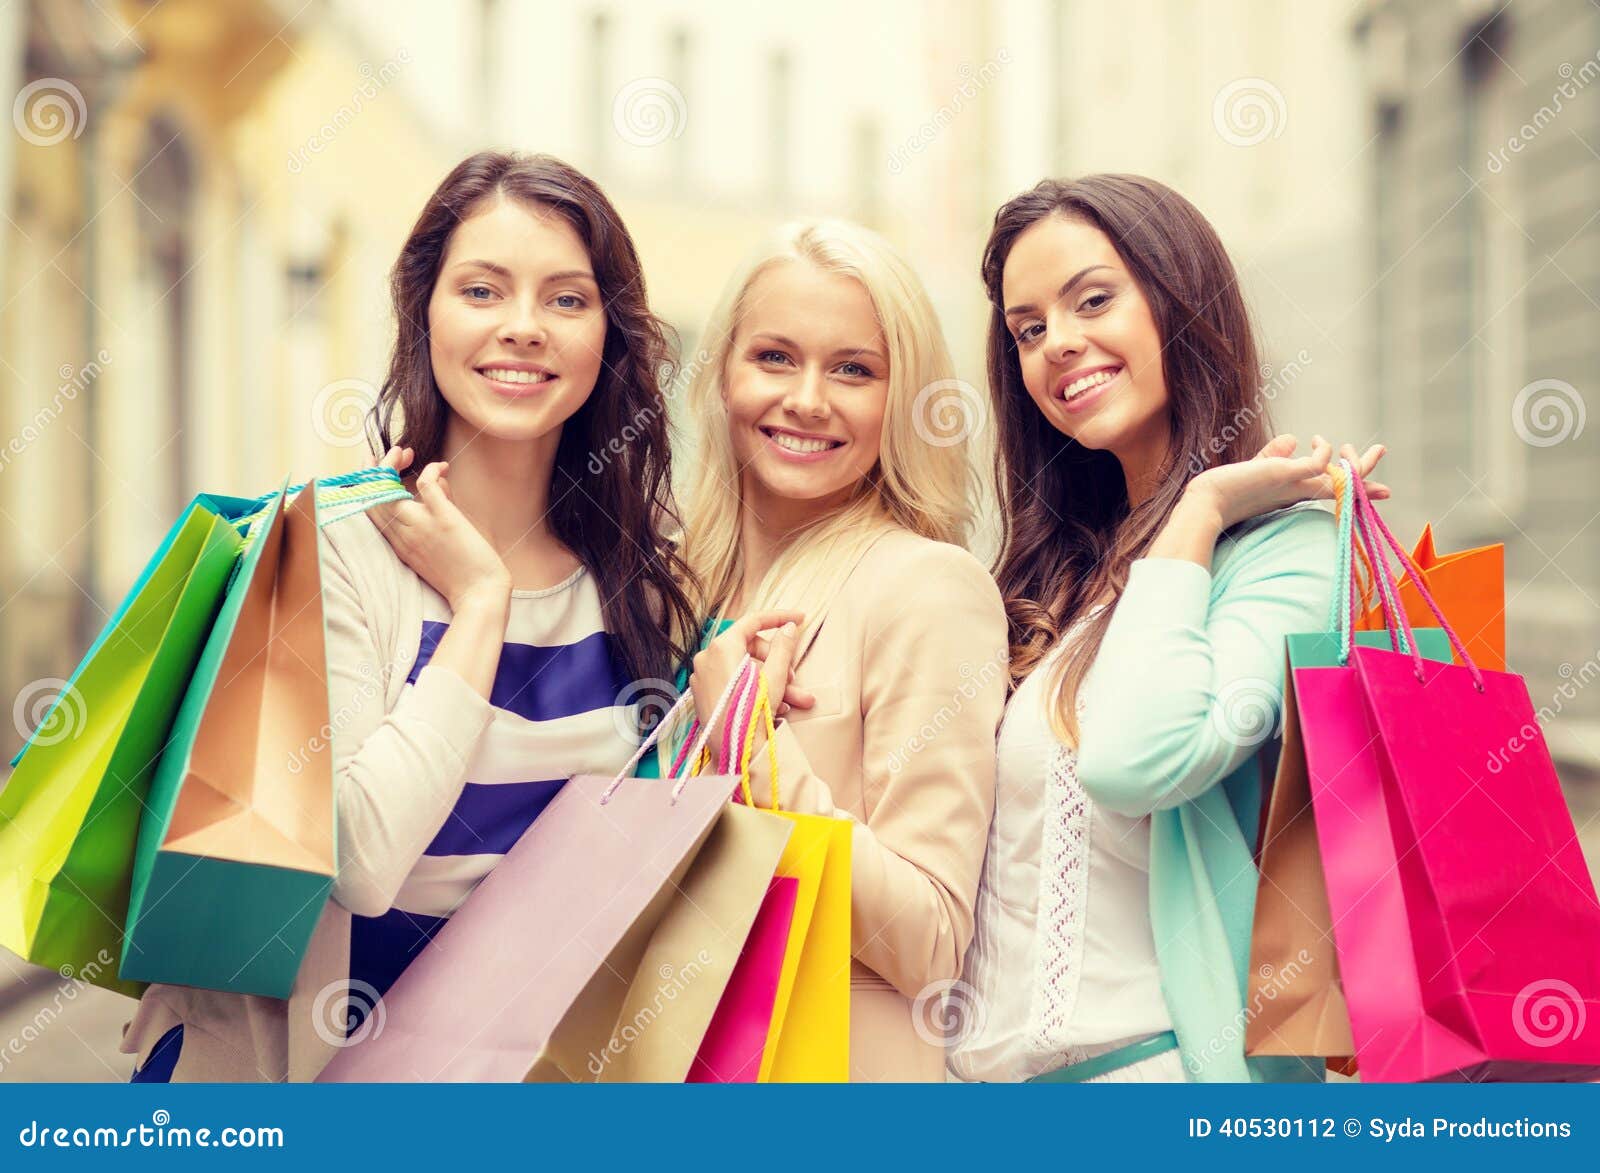 Three Smiling Girls with Shopping Bags in Ctiy Stock Photo - Image of ...